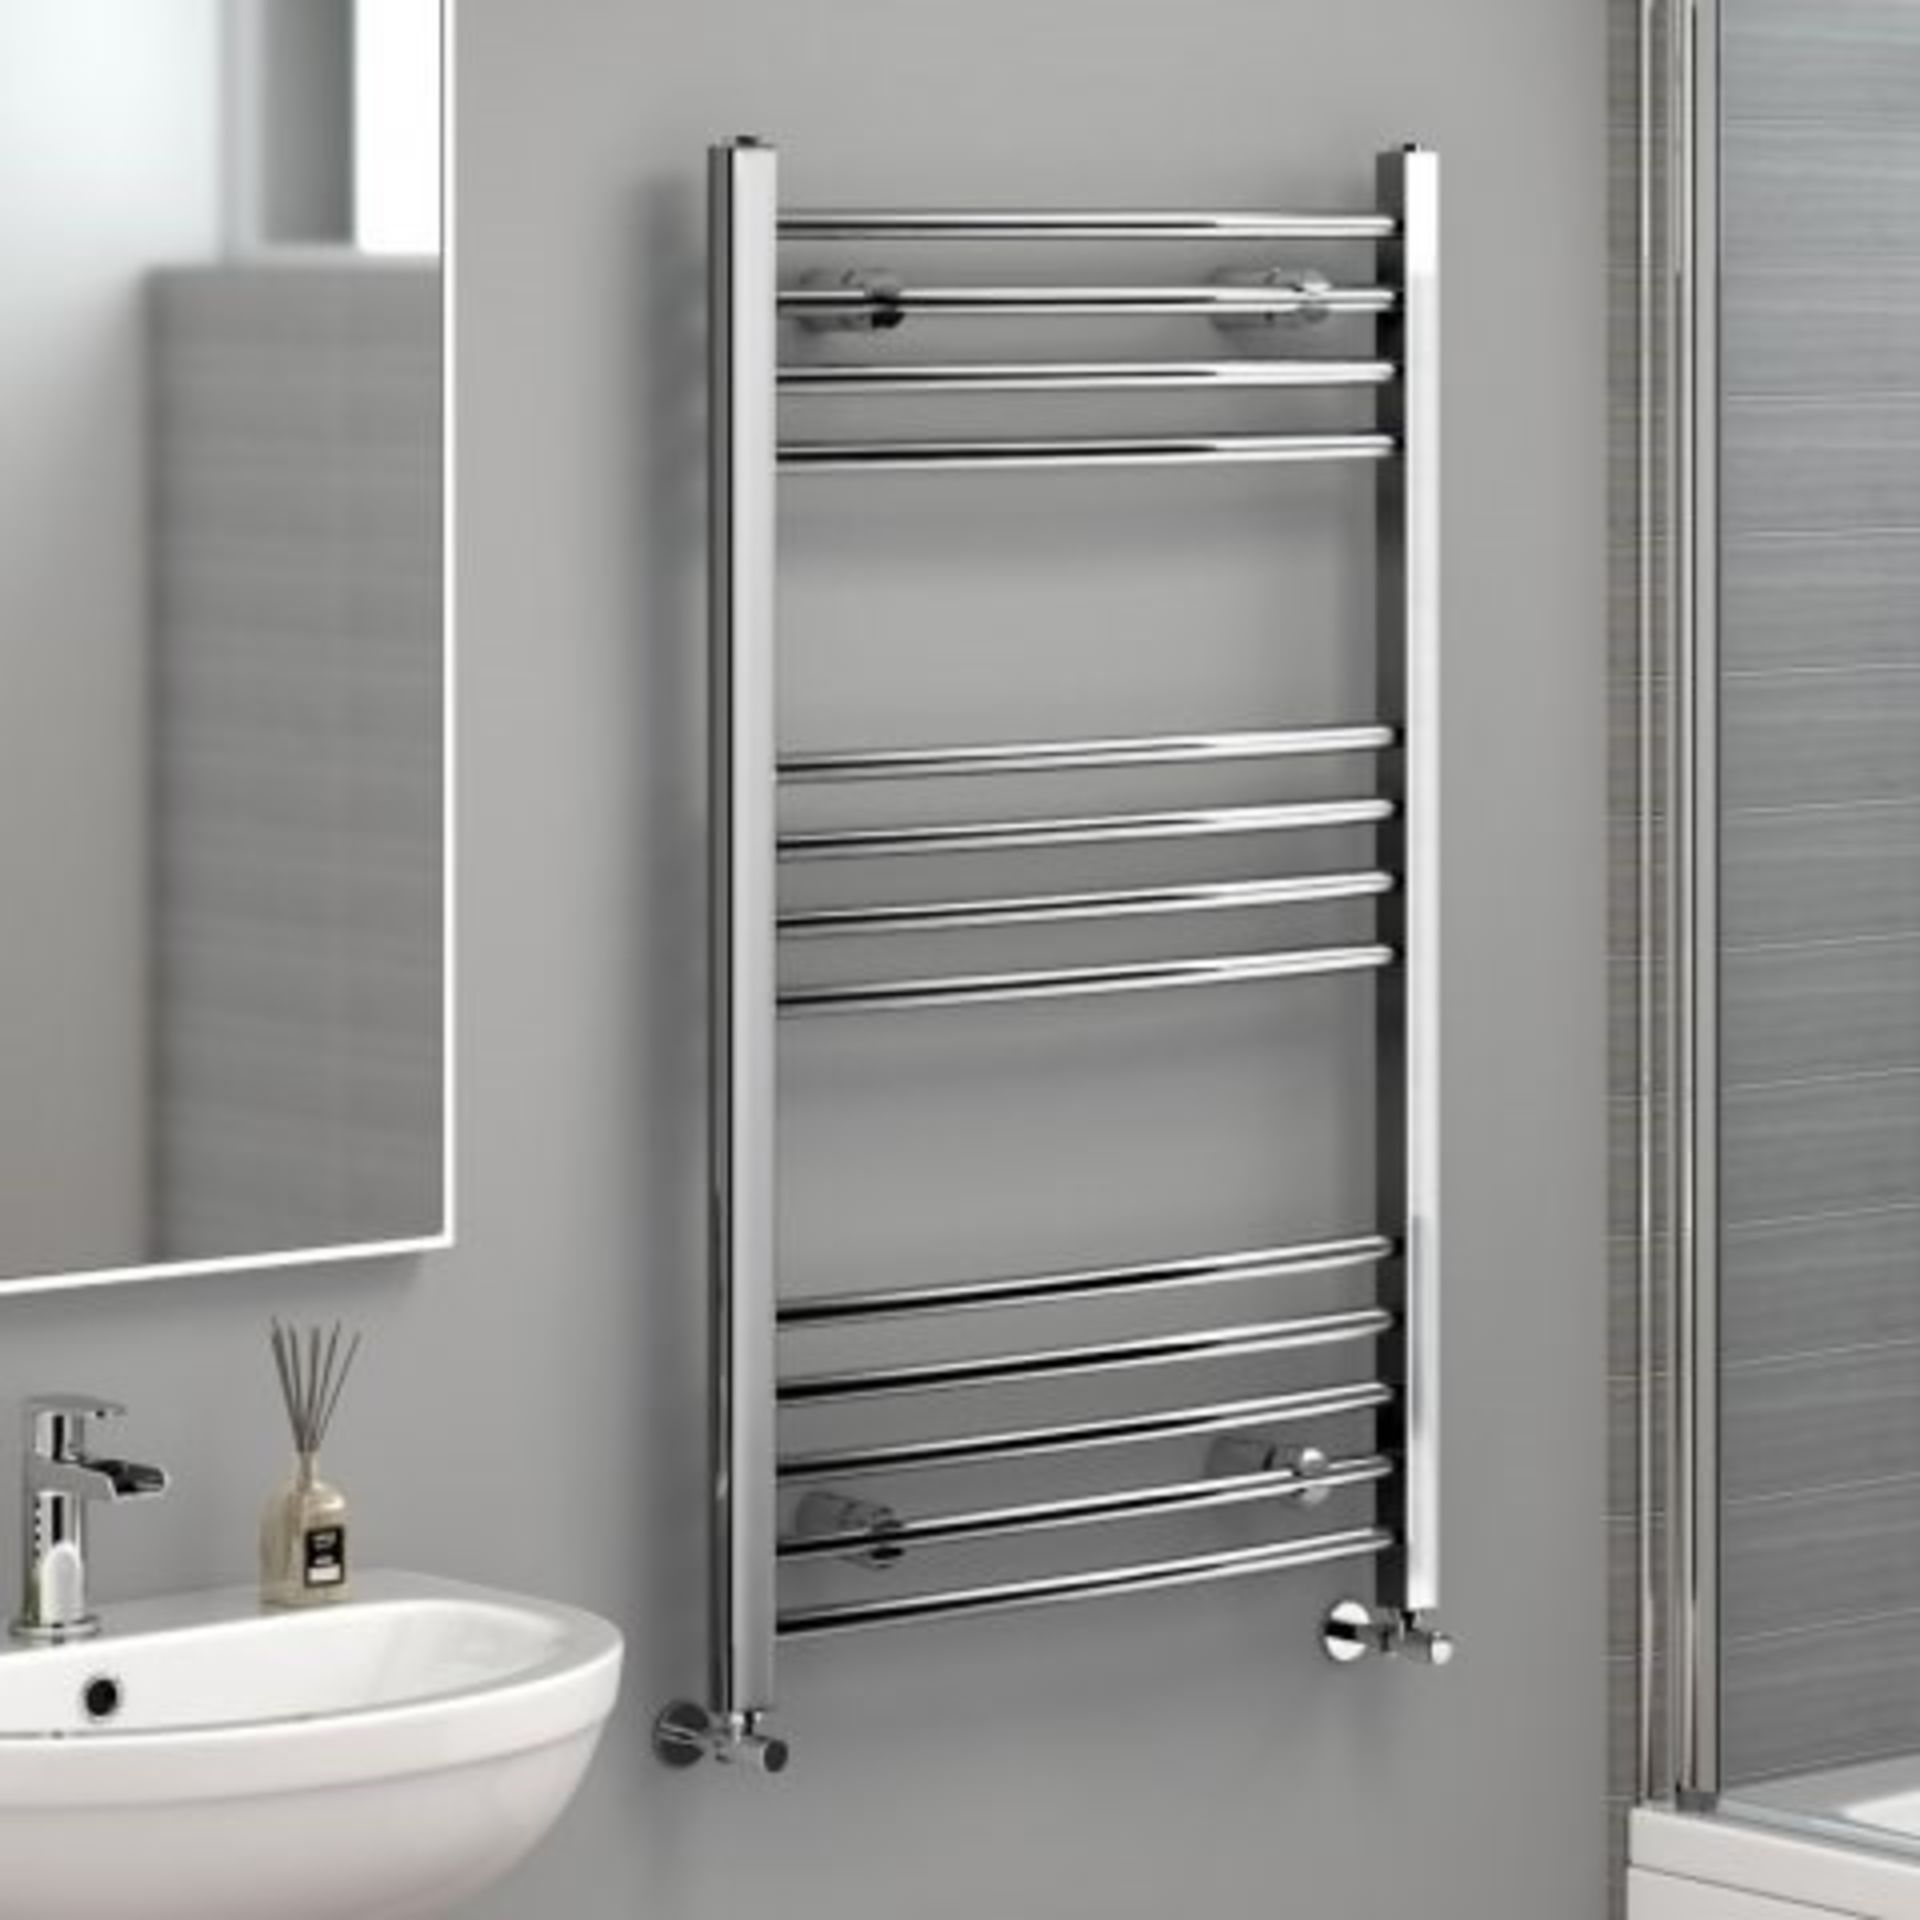 PALLET TO CONTAIN 18 x BRAND NEW BOXED 1200x600mm - 20mm Tubes - RRP £219.99 each.Chrome Curve...